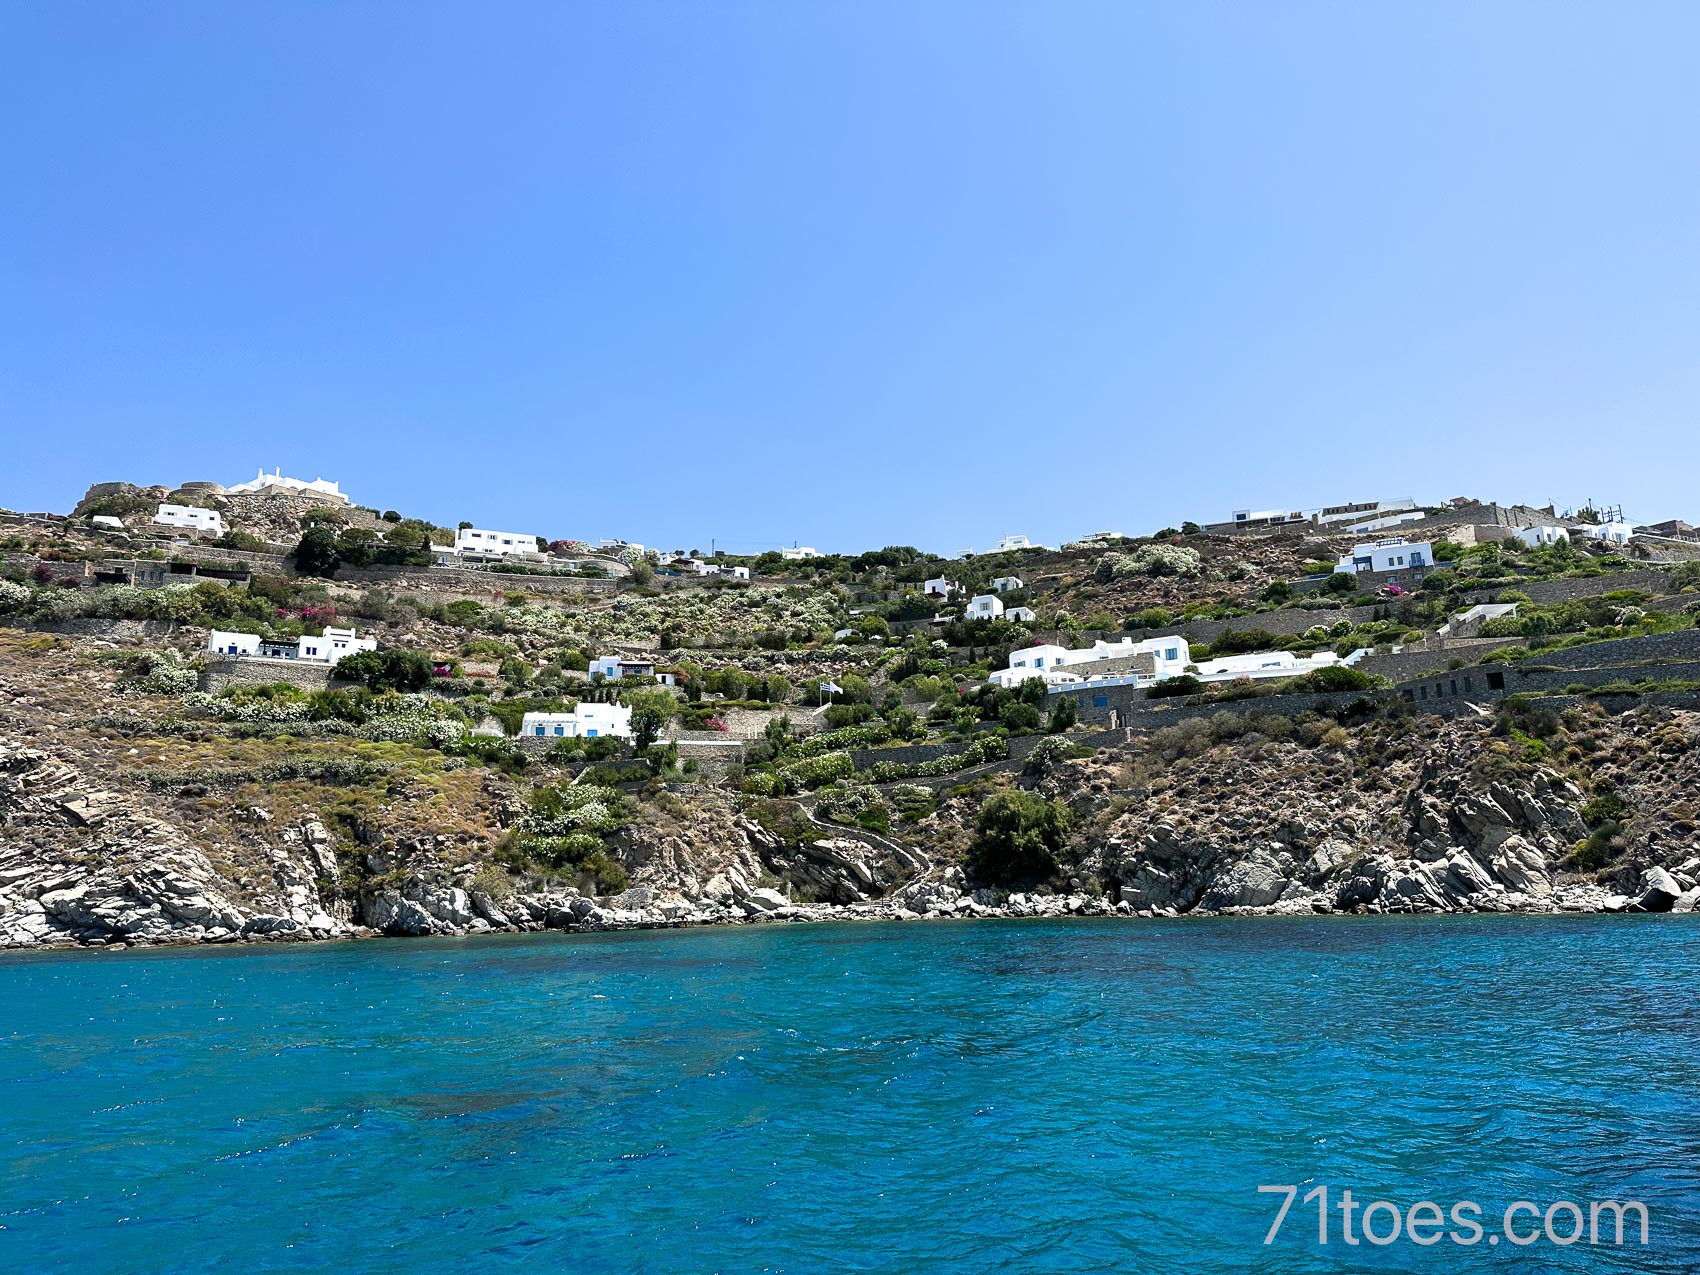 A view from the water taxi on our one day in Mykonos